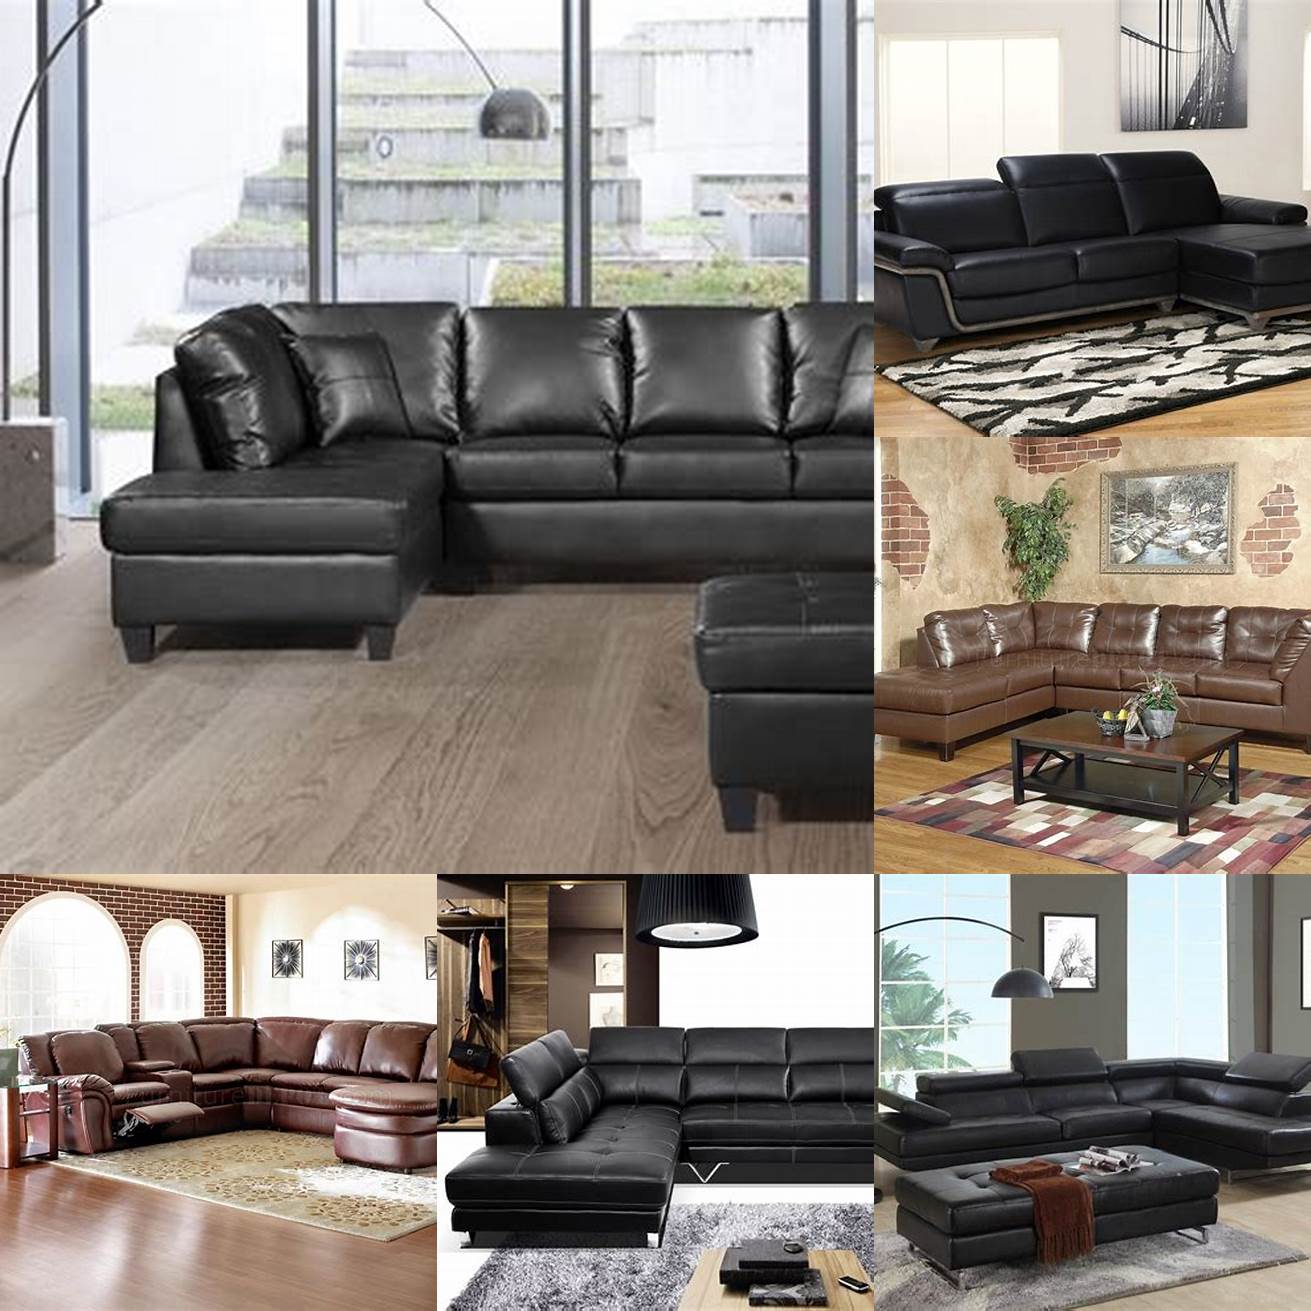 Image 4 A bonded leather sectional sofa